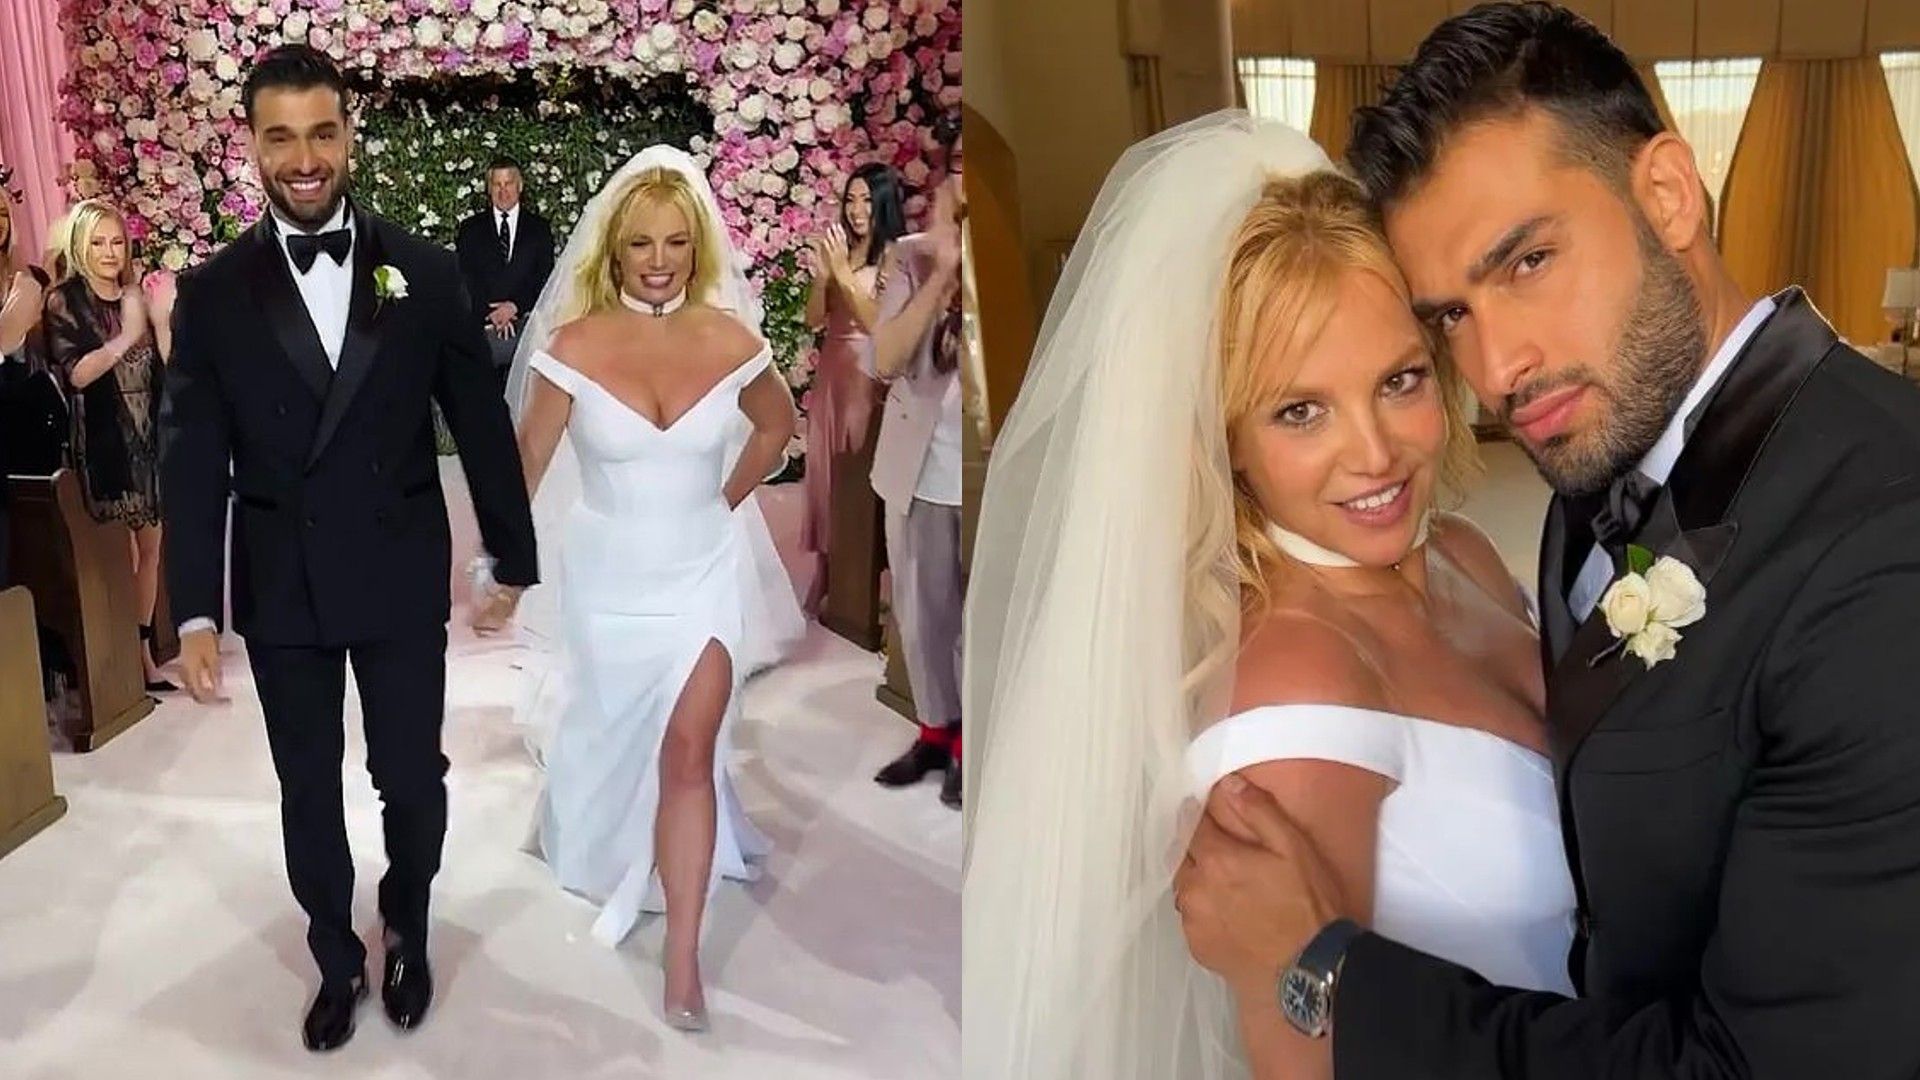 The wedding of Britney Spears and Sam Asghari